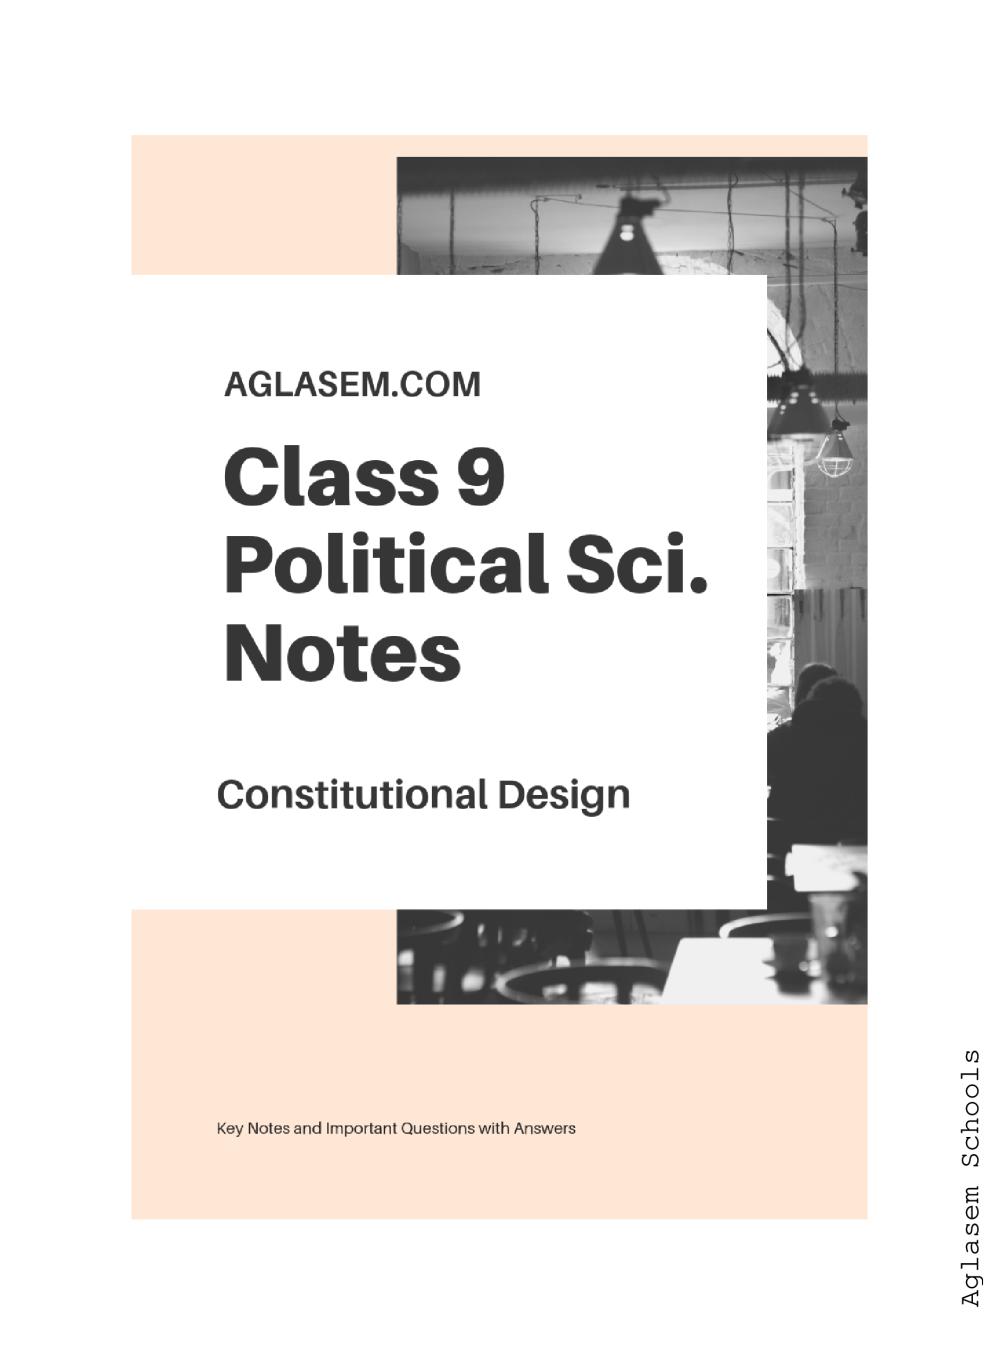 Class 9 Social Science Political Science / Civics Notes for Constitutional Design - Page 1